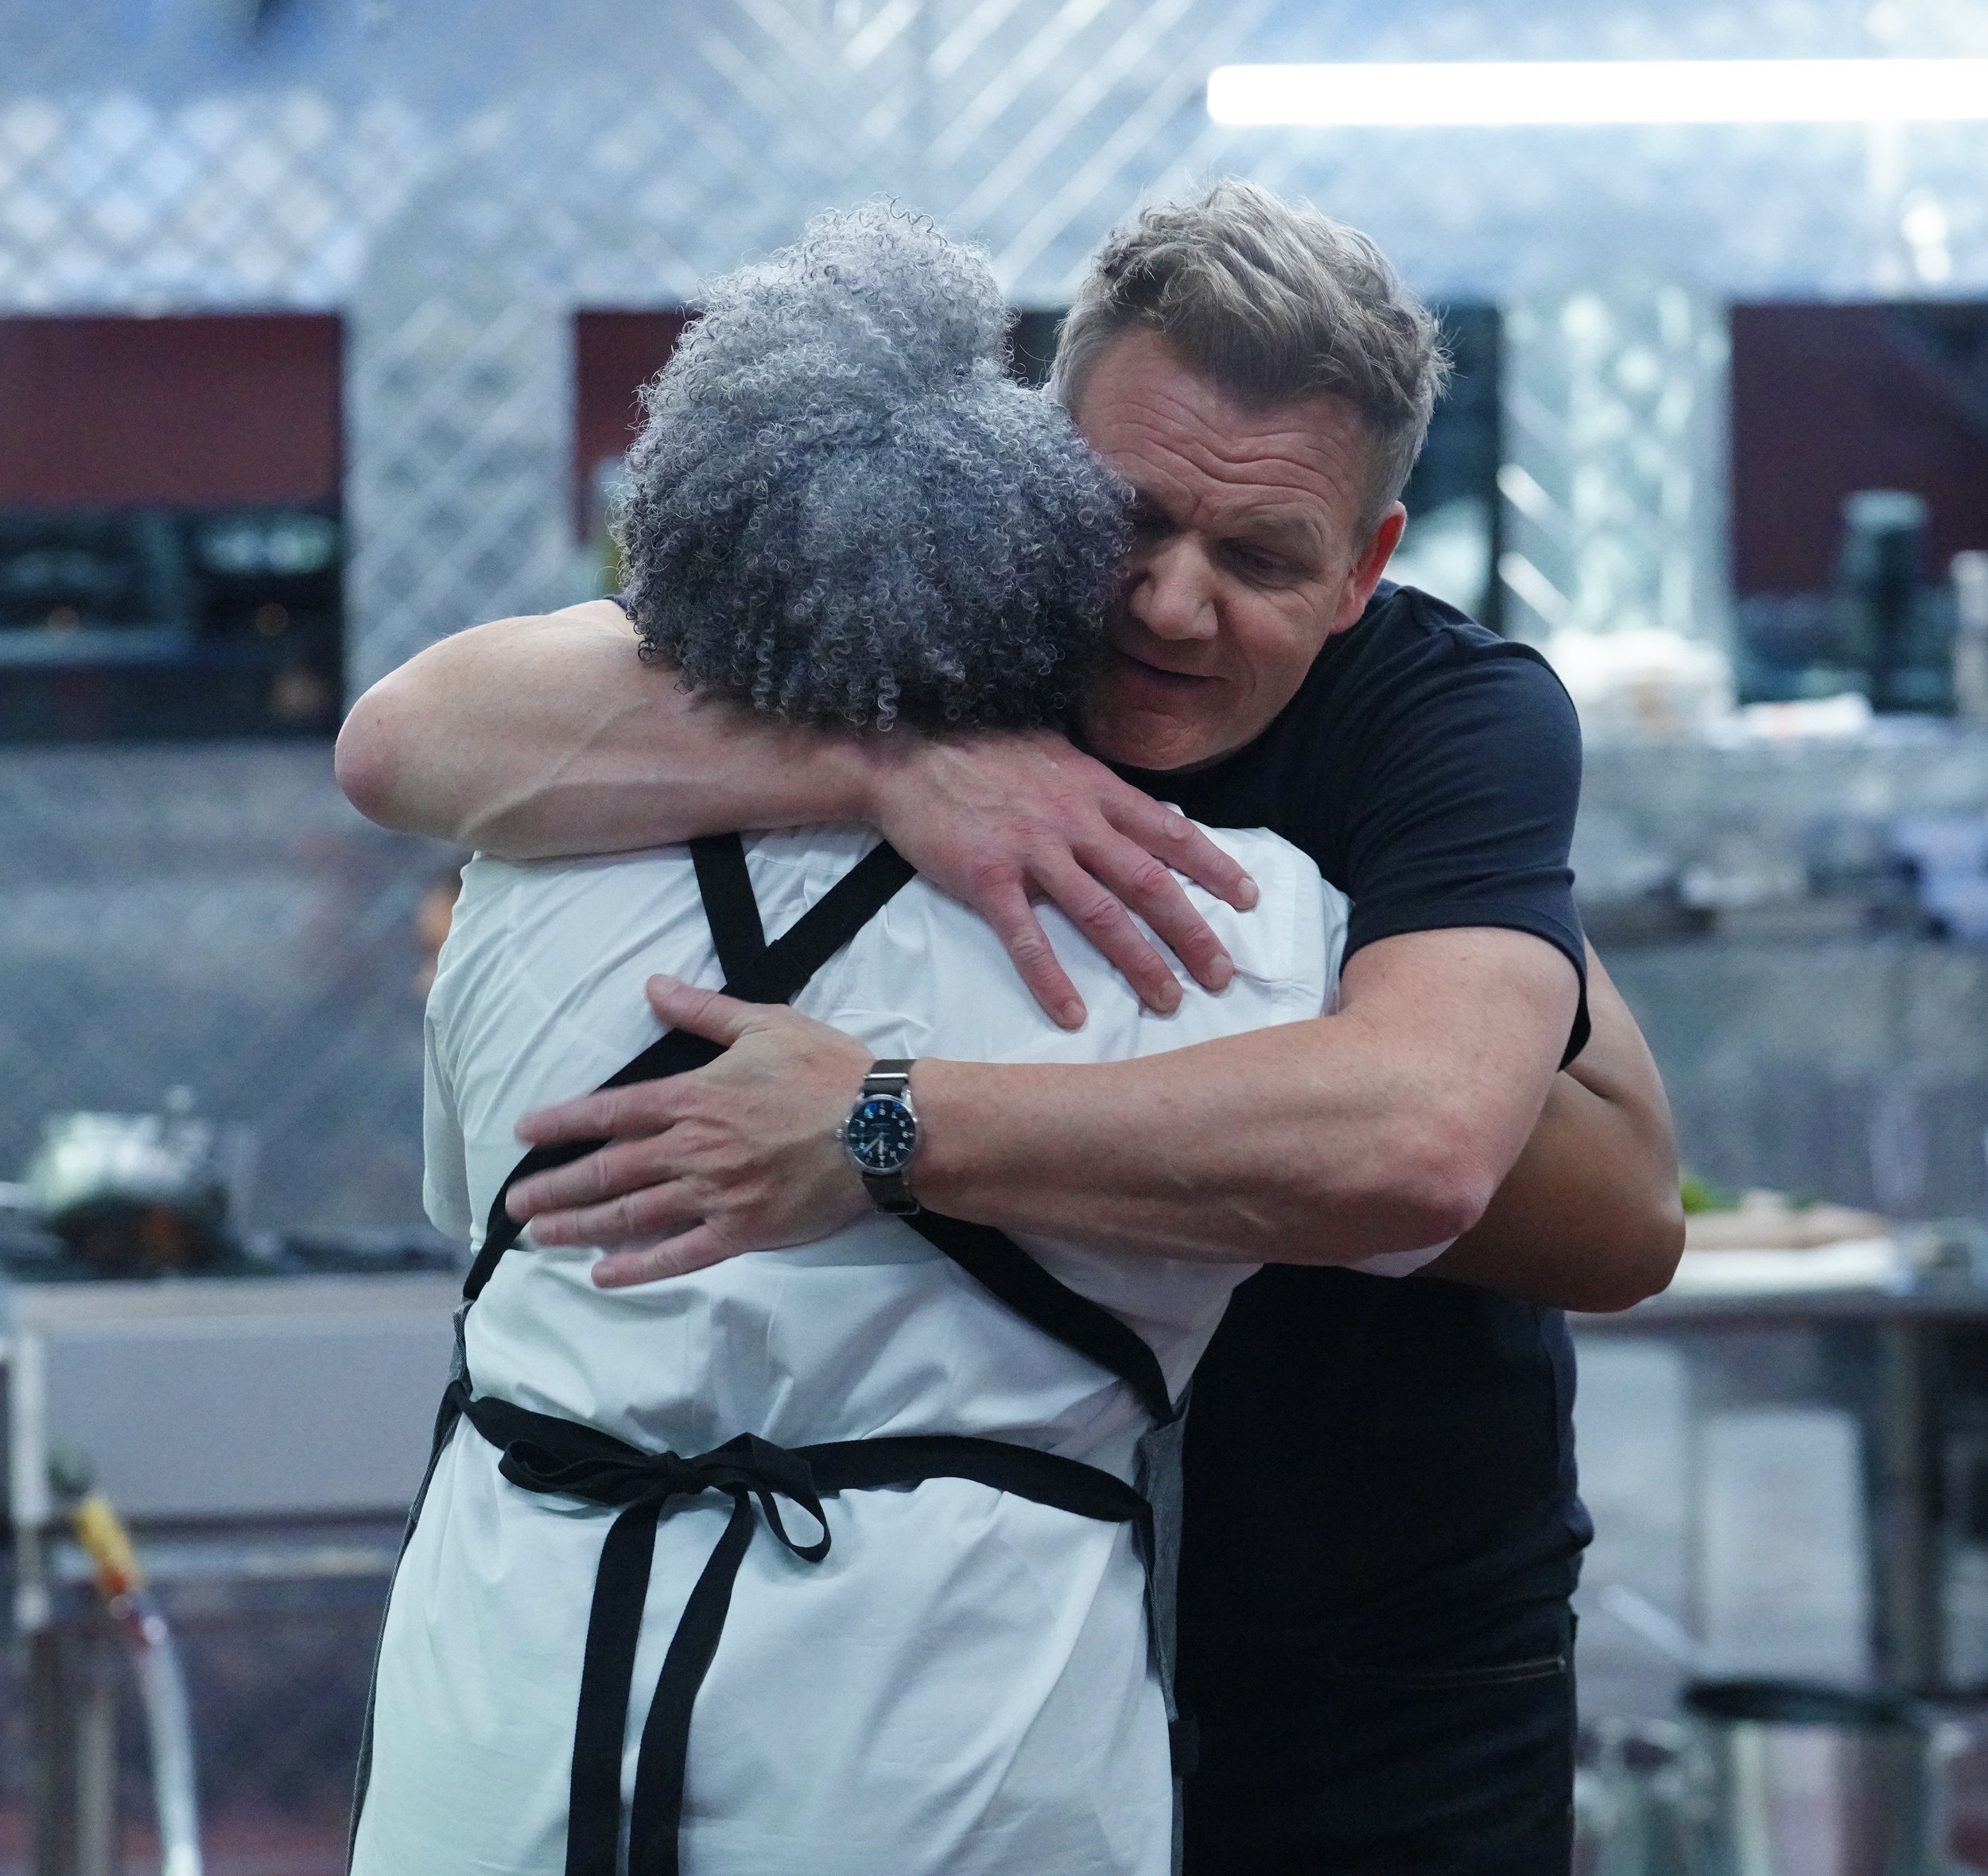  NEXT LEVEL CHEF: L-R: Contestant Courtney with mentor Gordon Ramsay in the “Show Stopping Semi-Finals” episode of NEXT LEVEL CHEF airing Wednesday, Feb 23 (8:00-9:00 ET/PT) on FOX © 2022 FOX Media LLC. CR: FOX. 